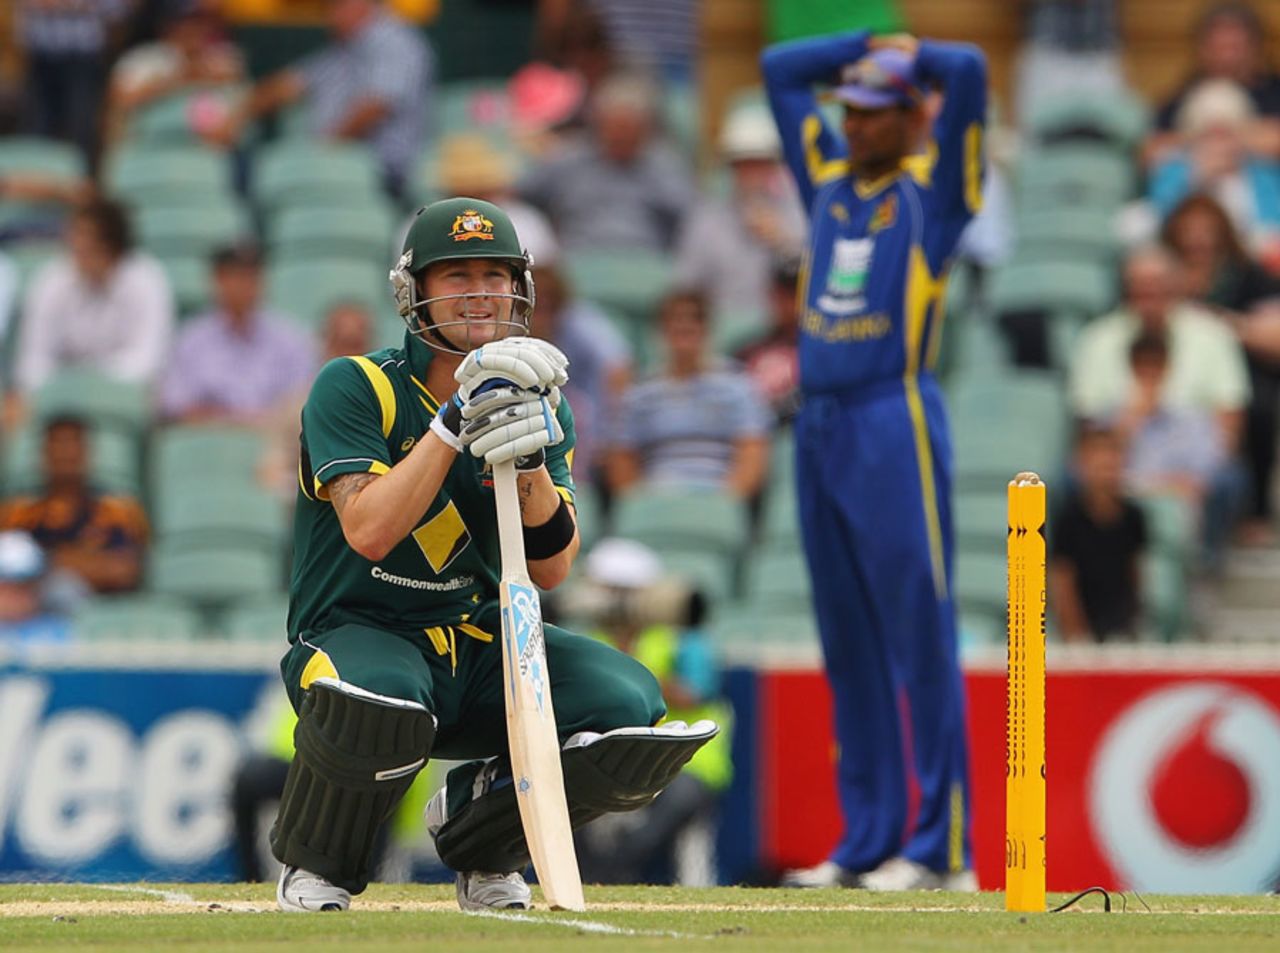 Michael Clarke shows some discomfort during his innings, Australia v Sri Lanka, Commonwealth Bank Series, 2nd final, Adelaide, March 6, 2012 